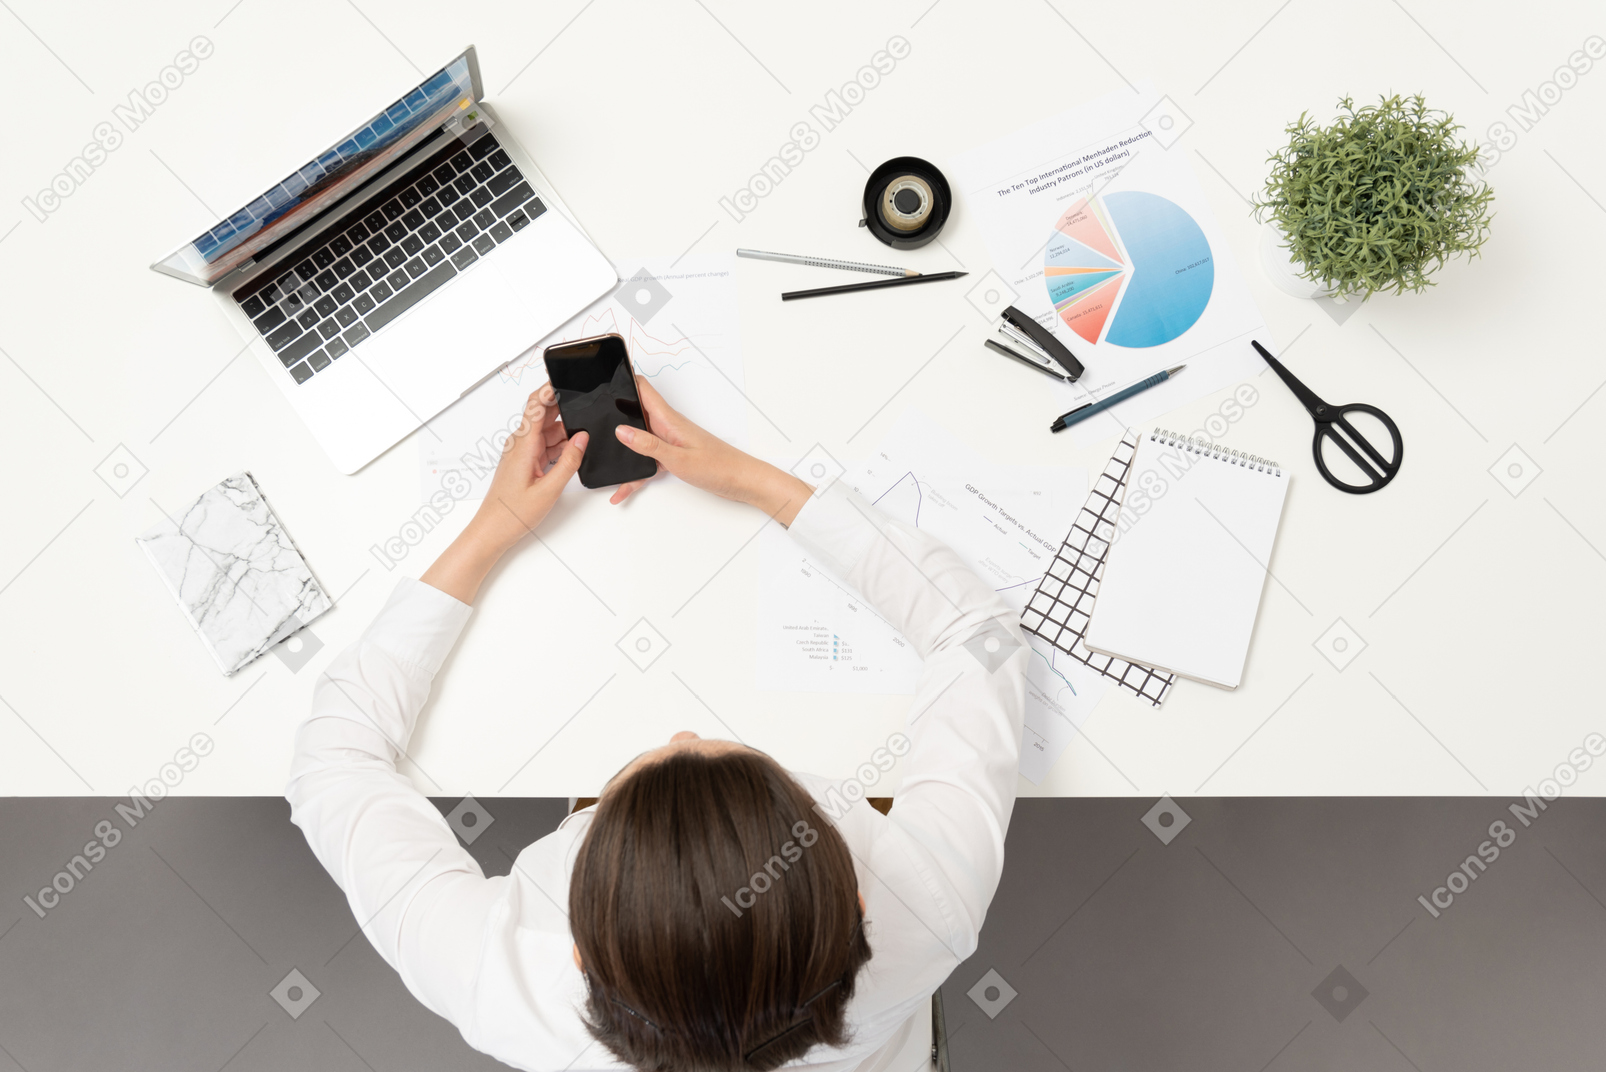 A female office worker at the table holding mobile phone